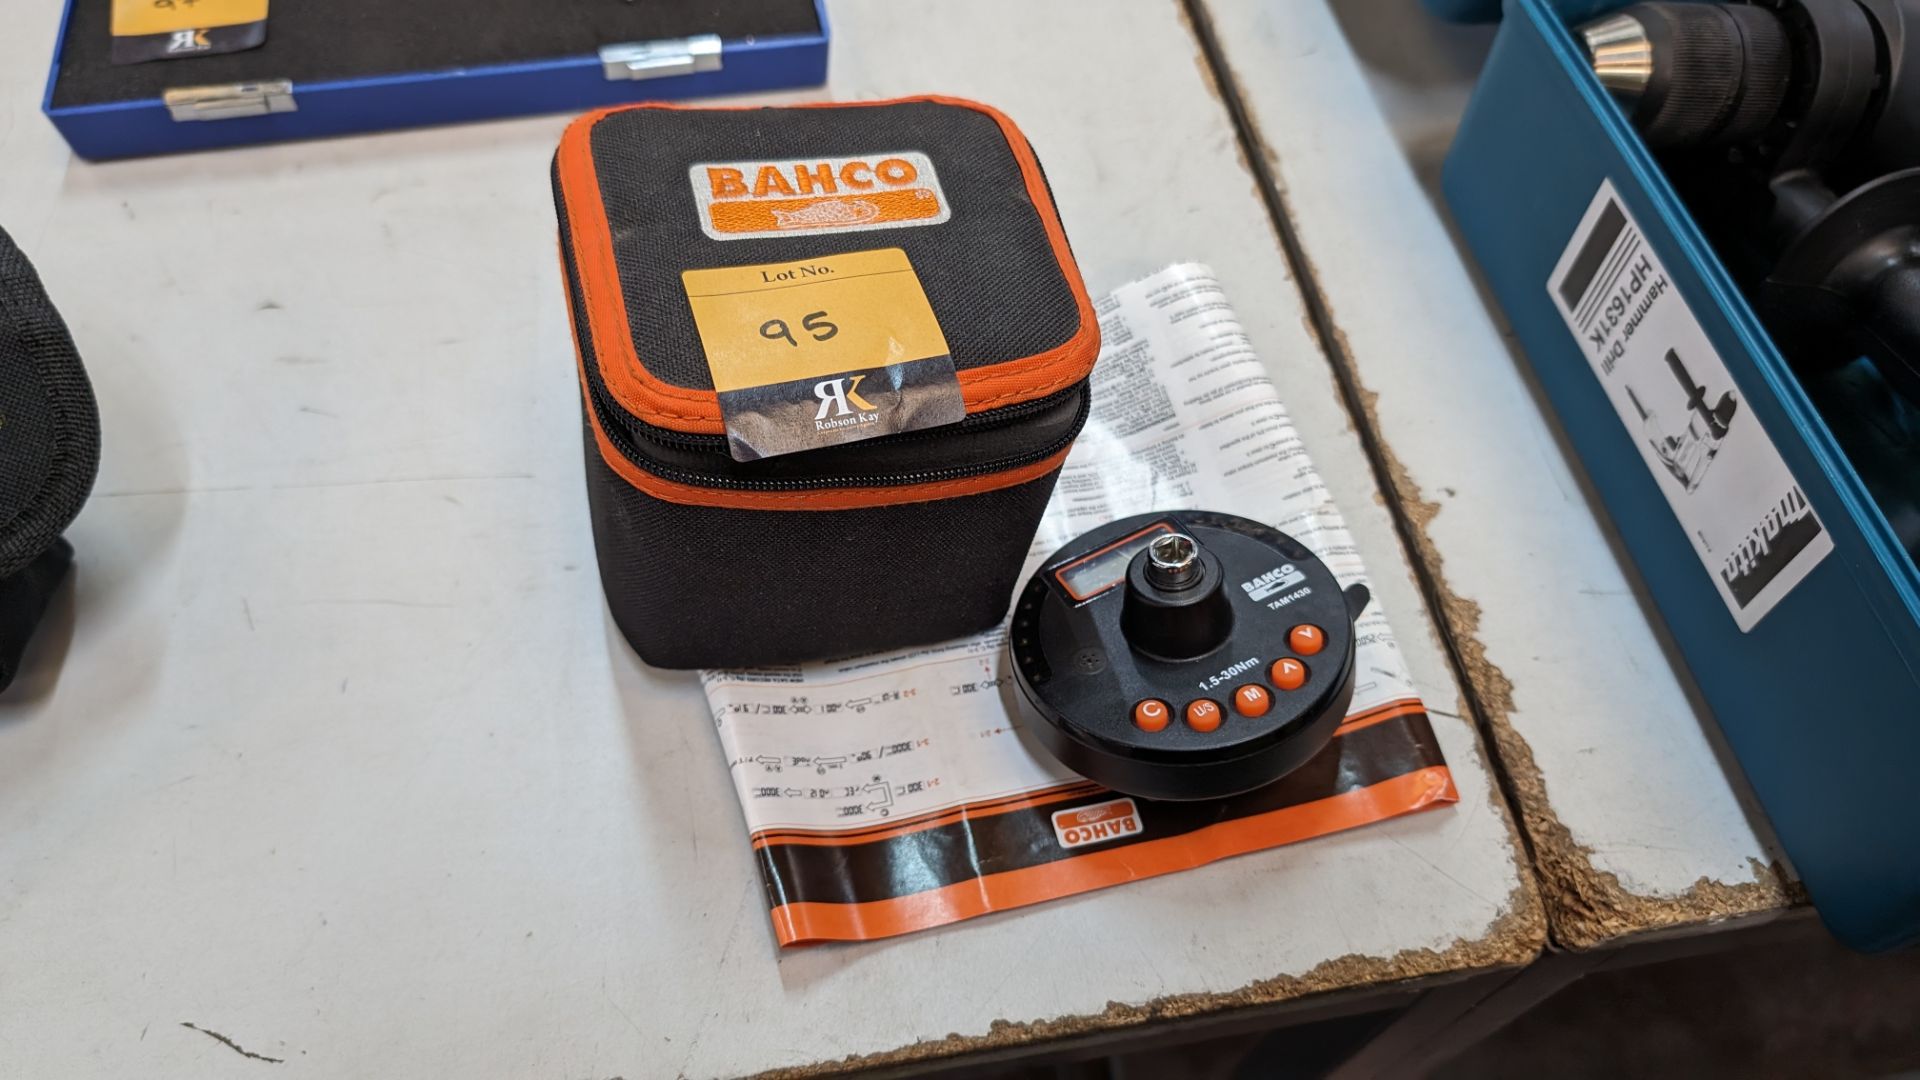 Bahco model TAM1430 electronic torque/angle measuring adaptor in case